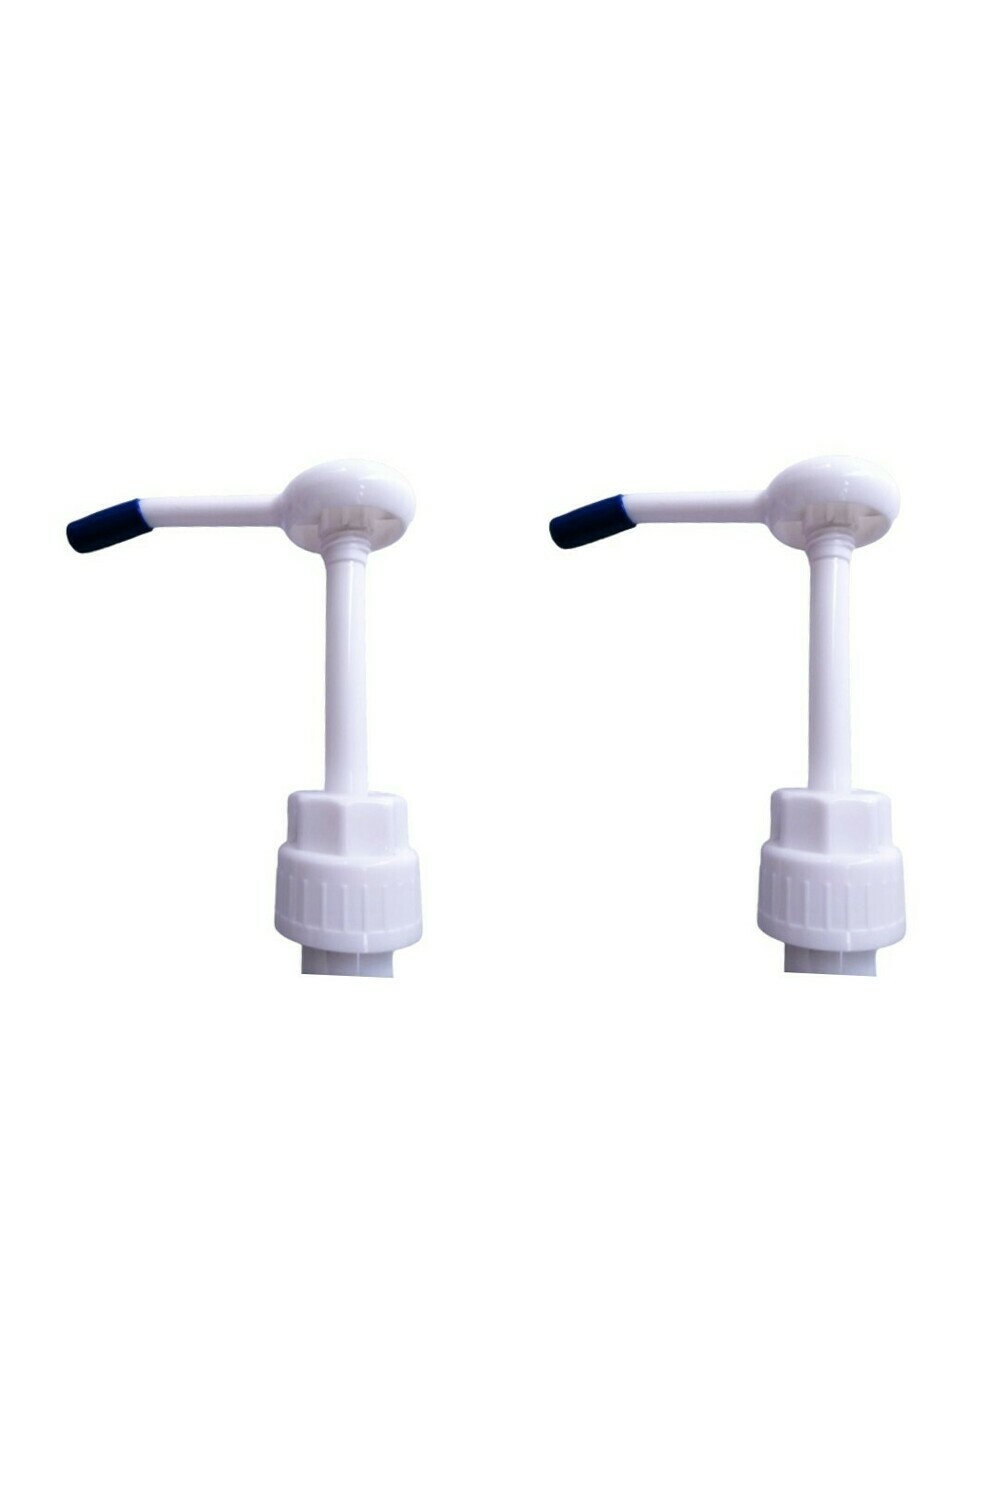 UK Fast delivery. White 10 Pack of 38mm Pelican Pump for 5 Litre container 